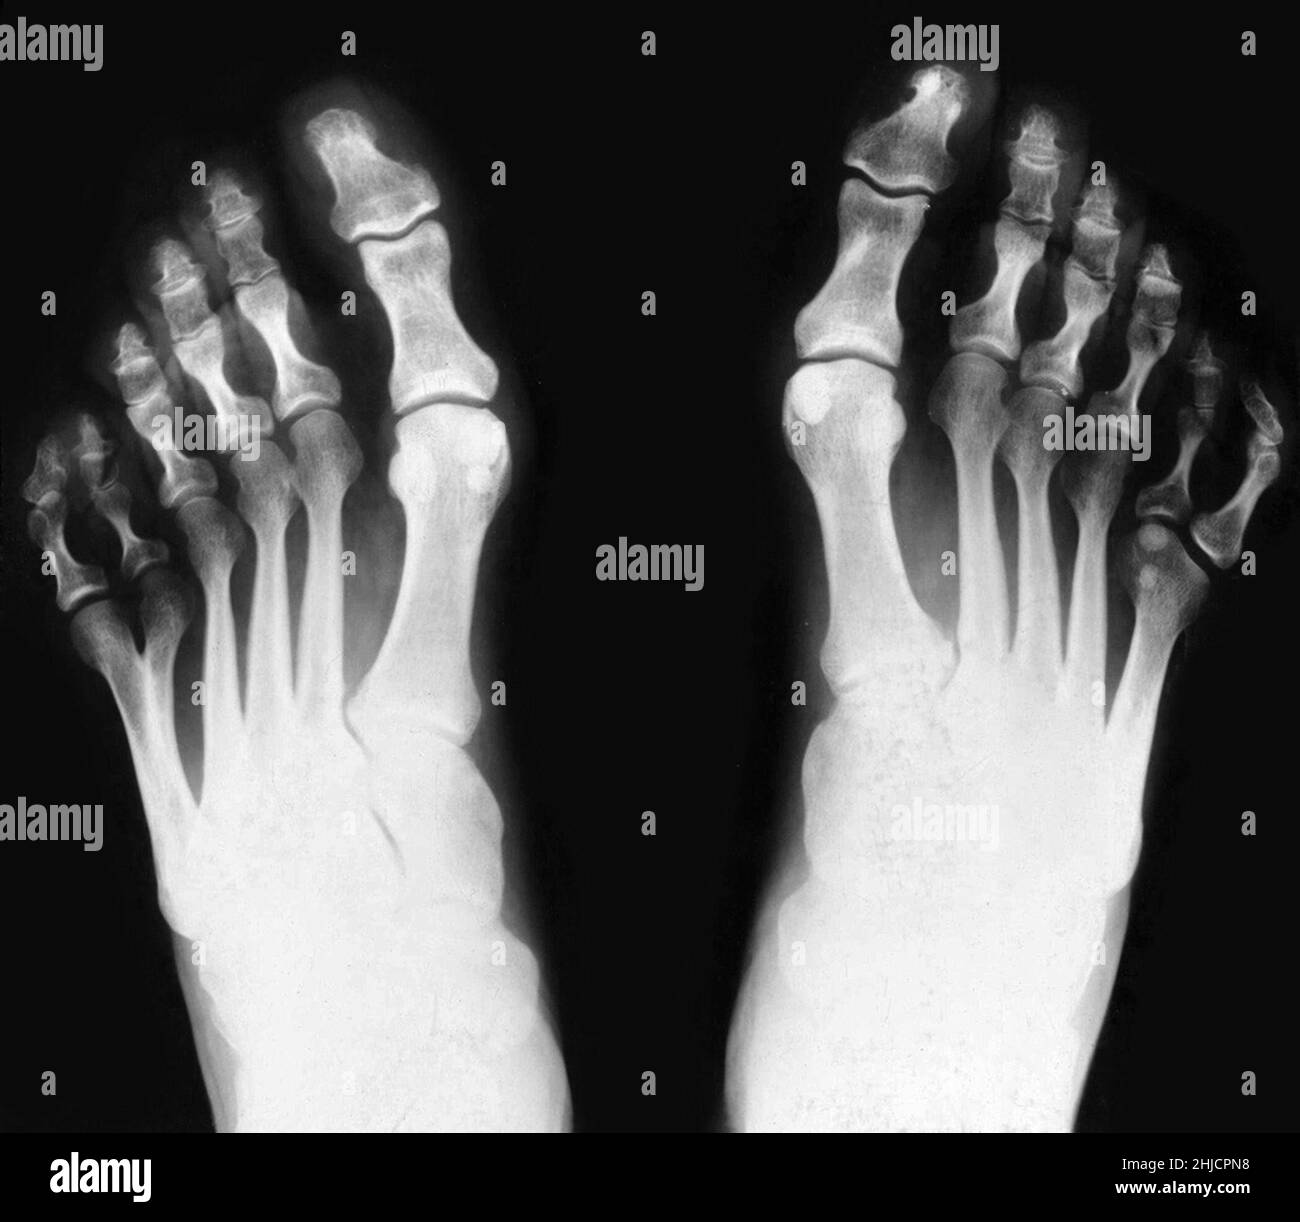 X-ray of feet, showing postaxial polydactyly. Polydactylism is the congenital abnormality of having extraneous fingers or toes. As visible above, this individual had six toes on both feet. This is an example of postaxial polydactyly, because the extra digit occurs on the pinky side of the foot. Stock Photo